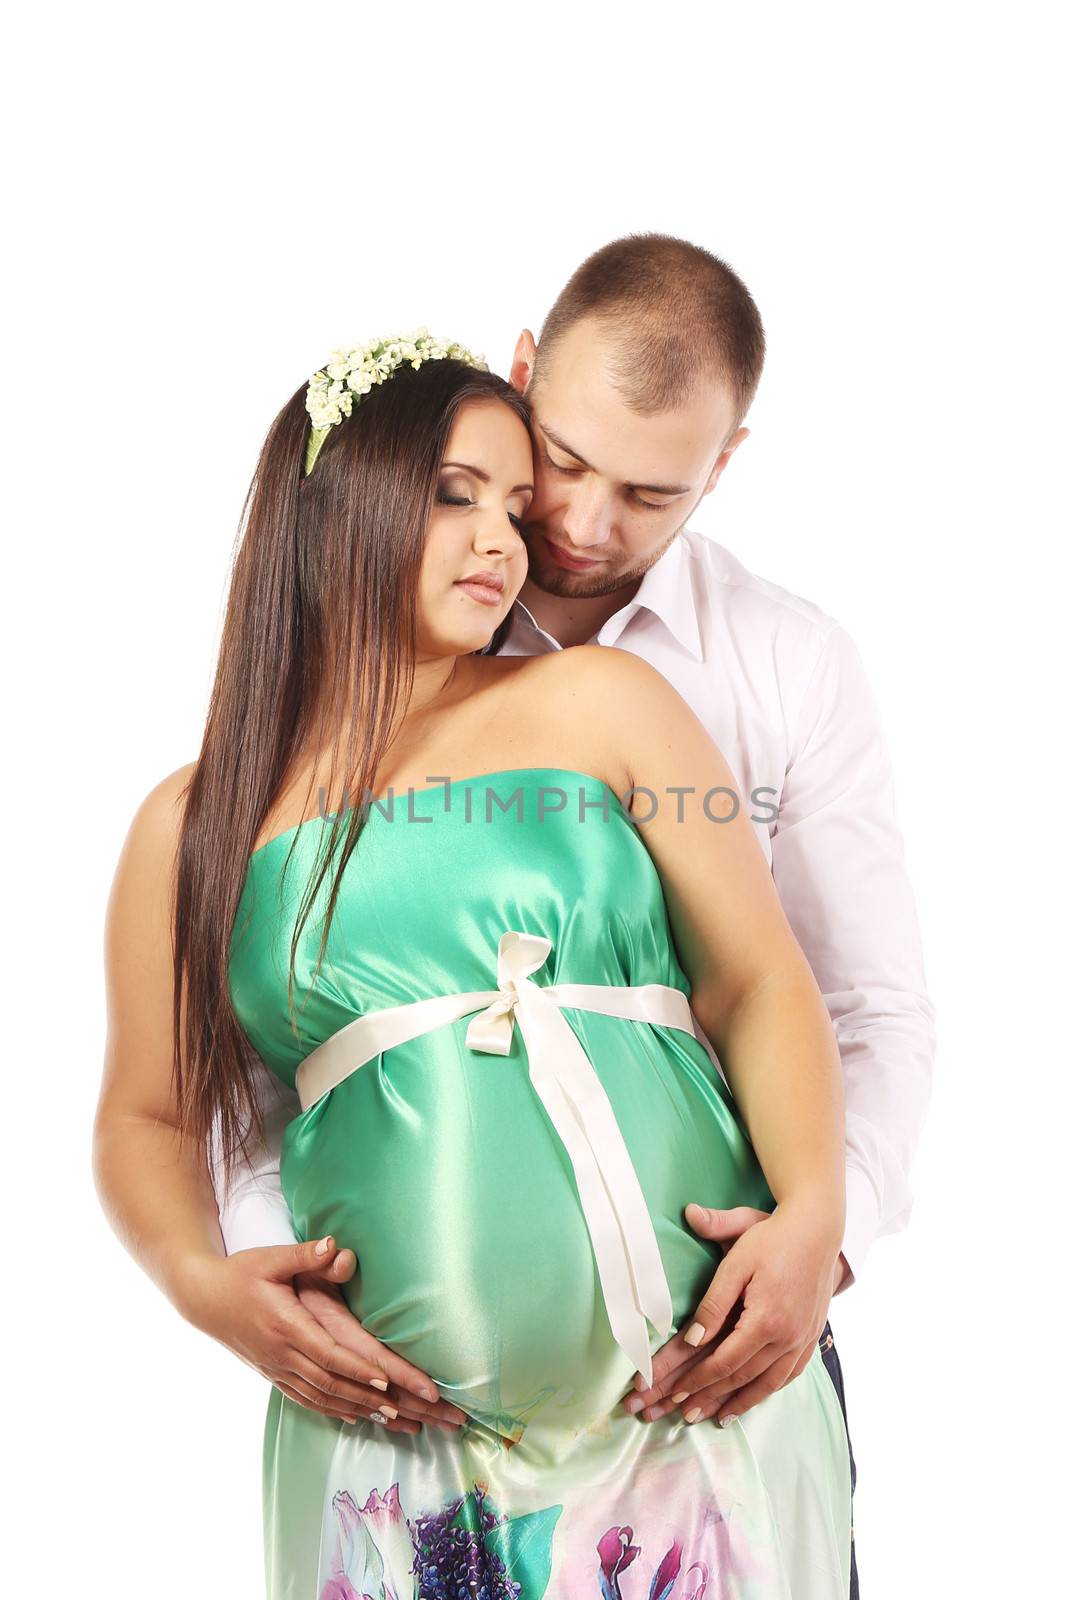 Beautiful pregnant girl with her husband. by indigolotos